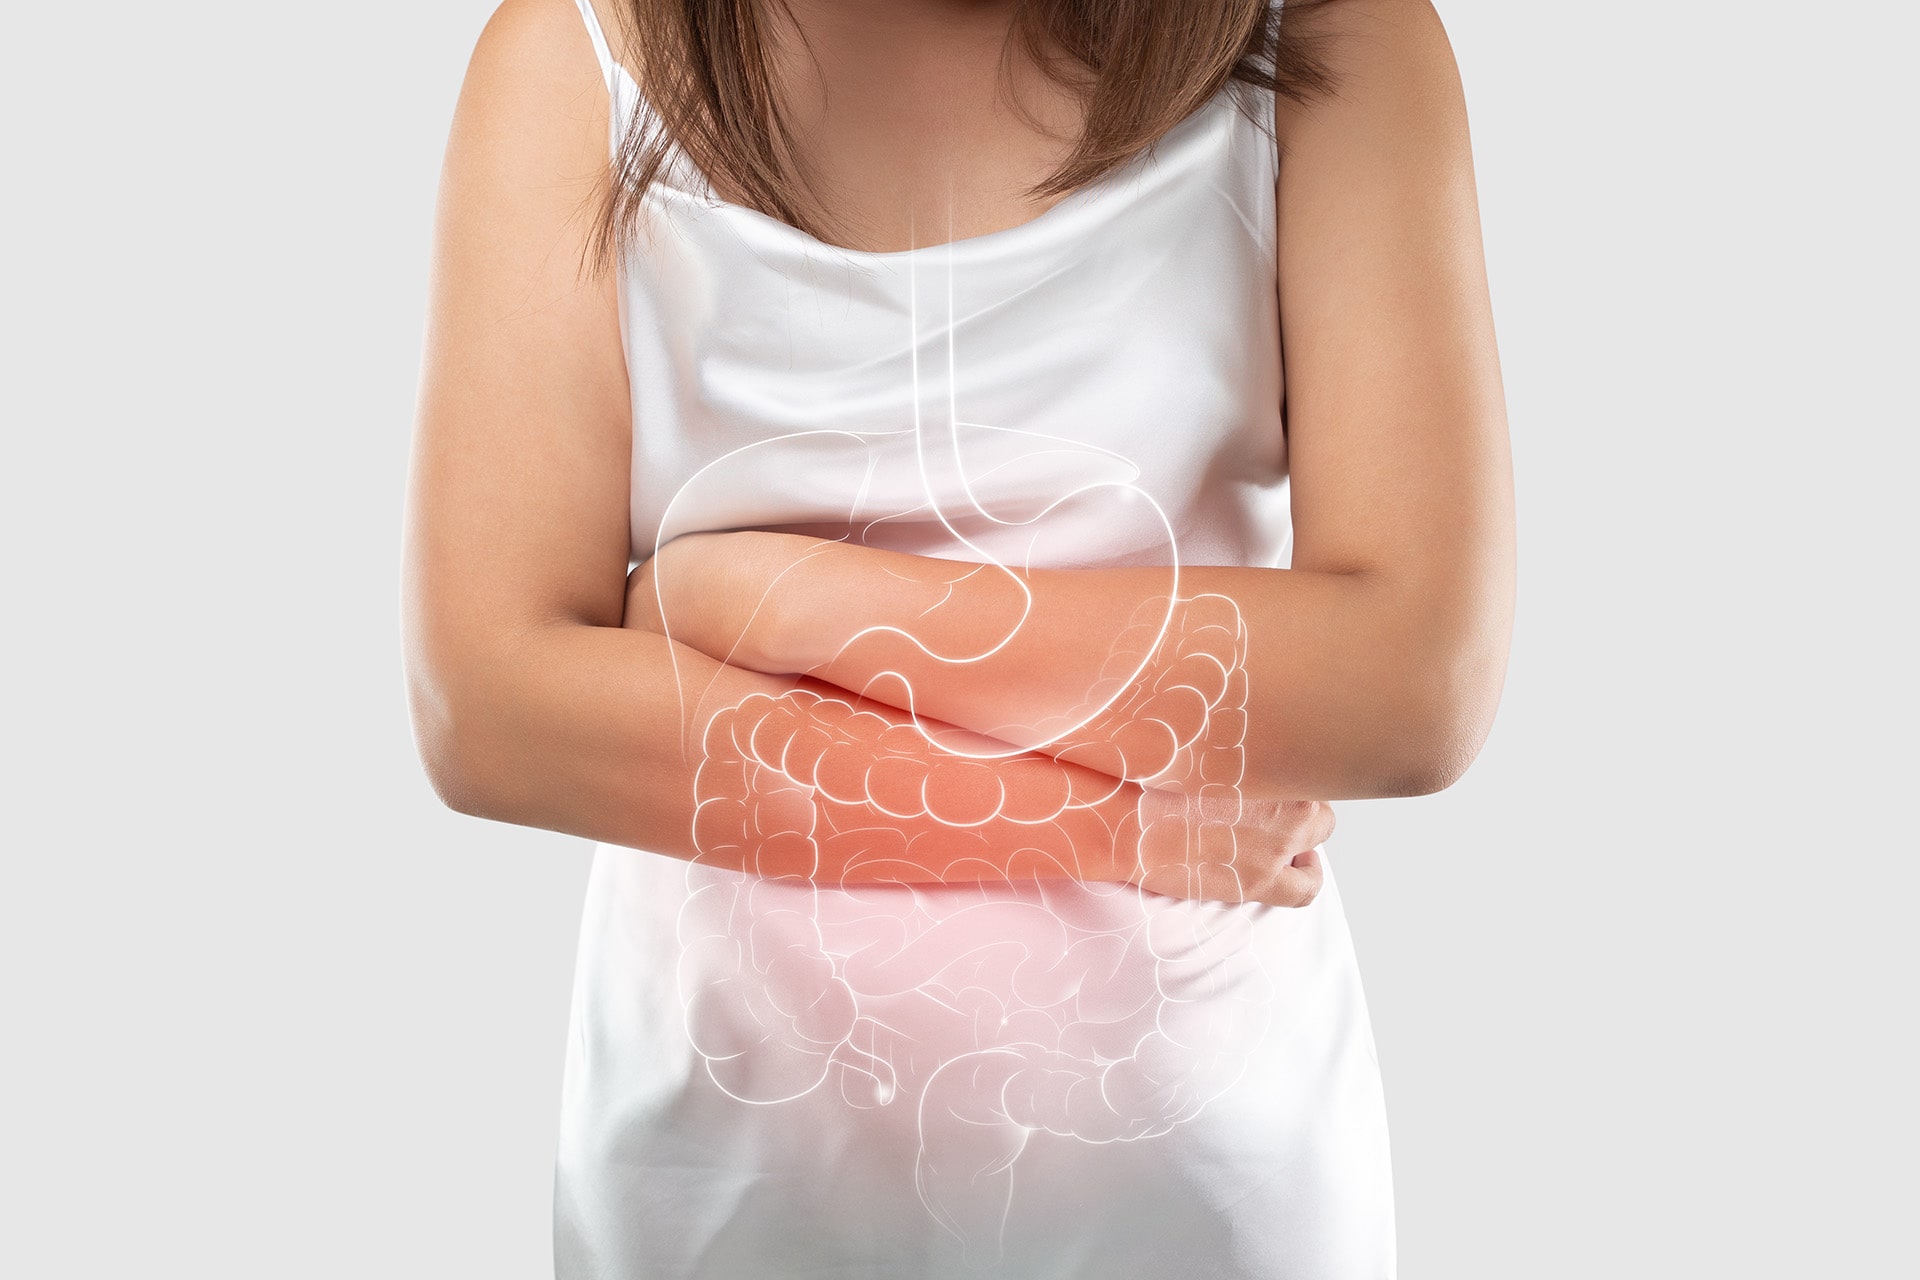 What Is the Connection Between Constipation and Indigestion?